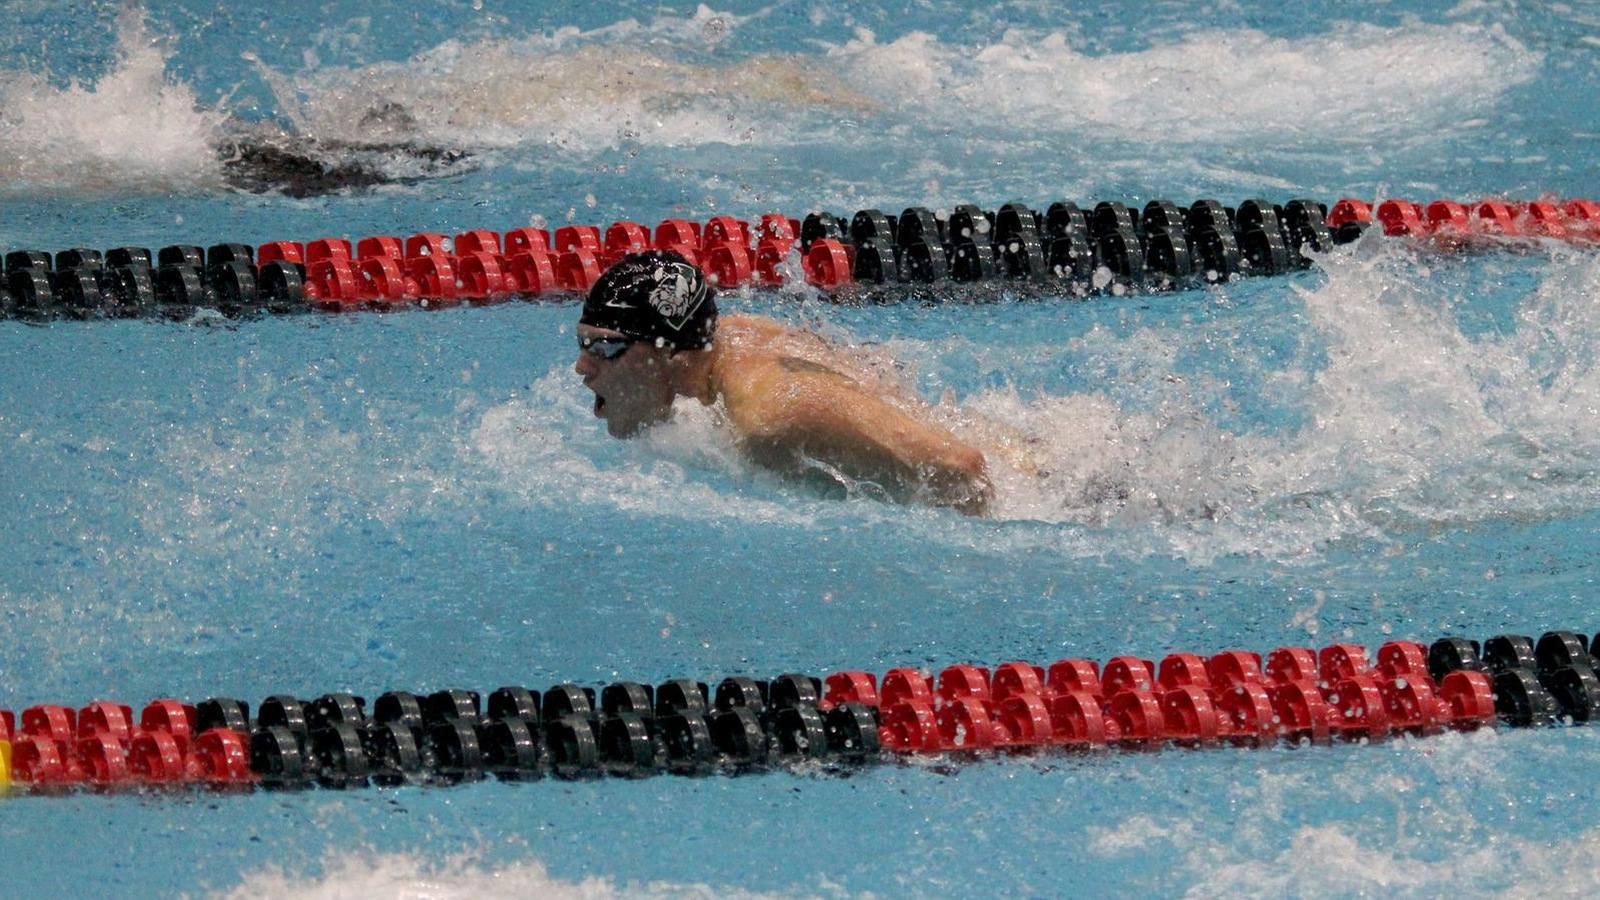 CSU Men Come Back to Beat UIC on Final Event